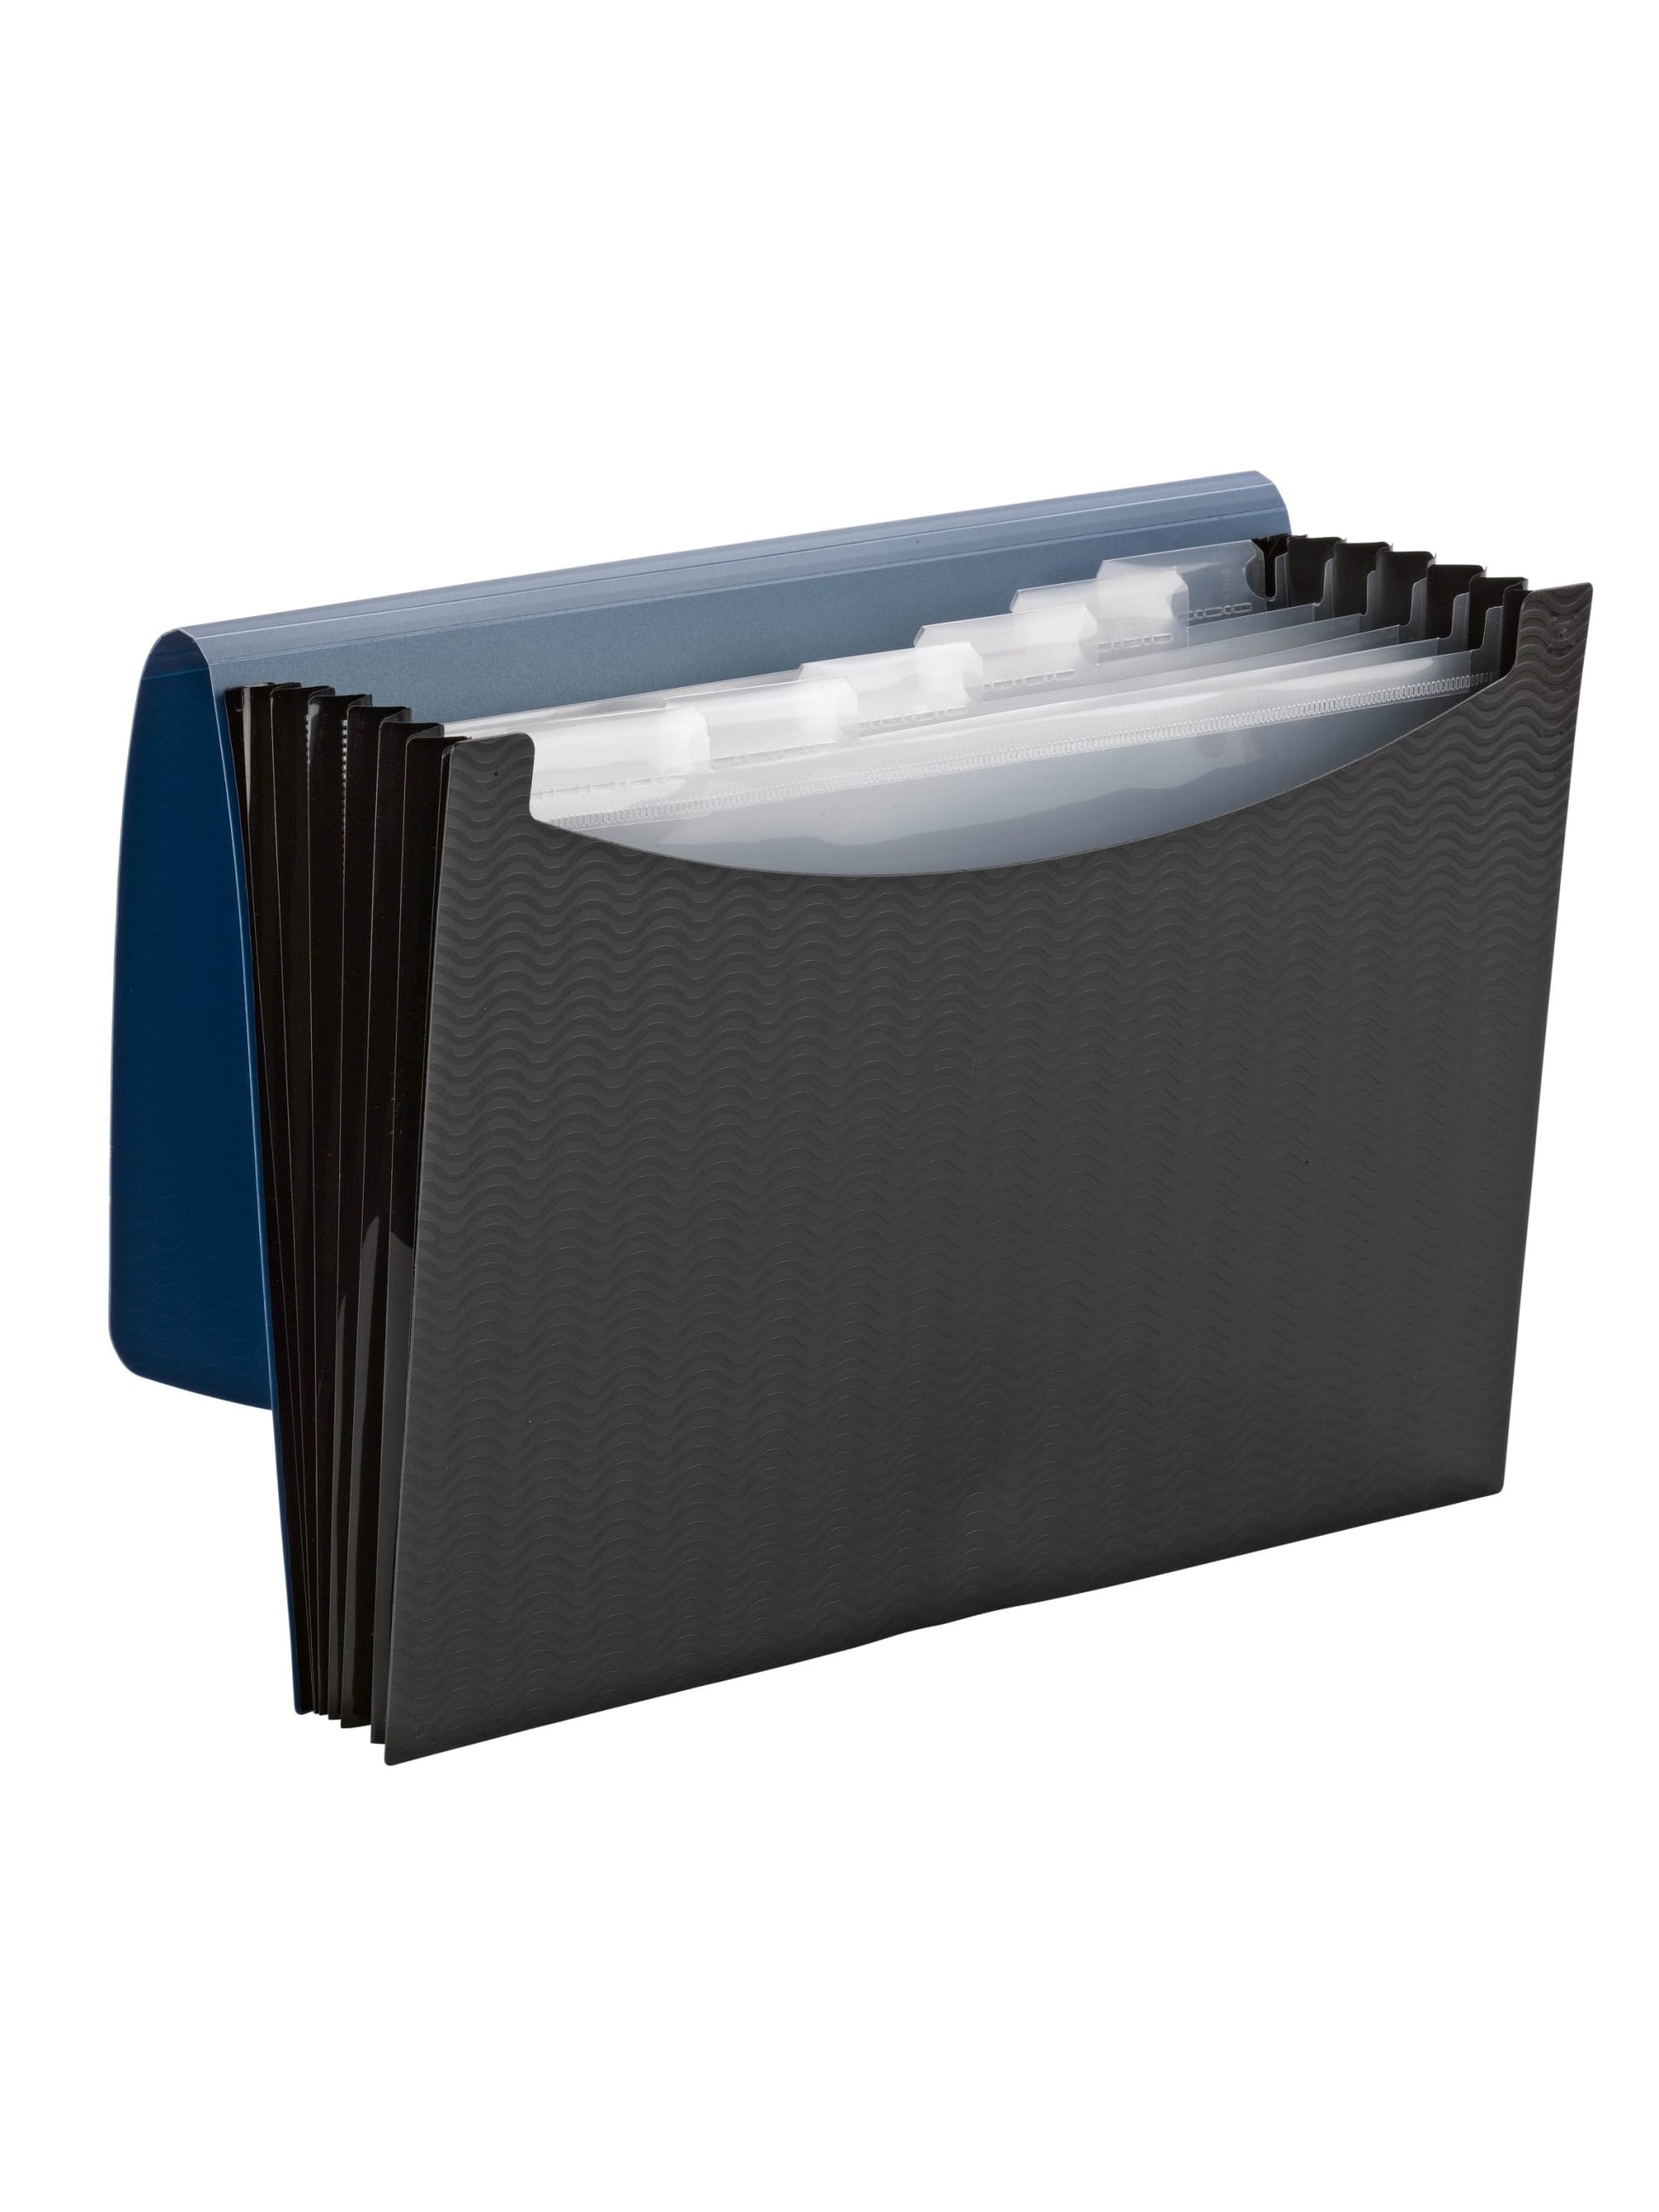 Poly Expanding Files with Flap, 6 Pockets, Wave Pattern, Blue Color, Letter Size, Set of 1, 086486708722